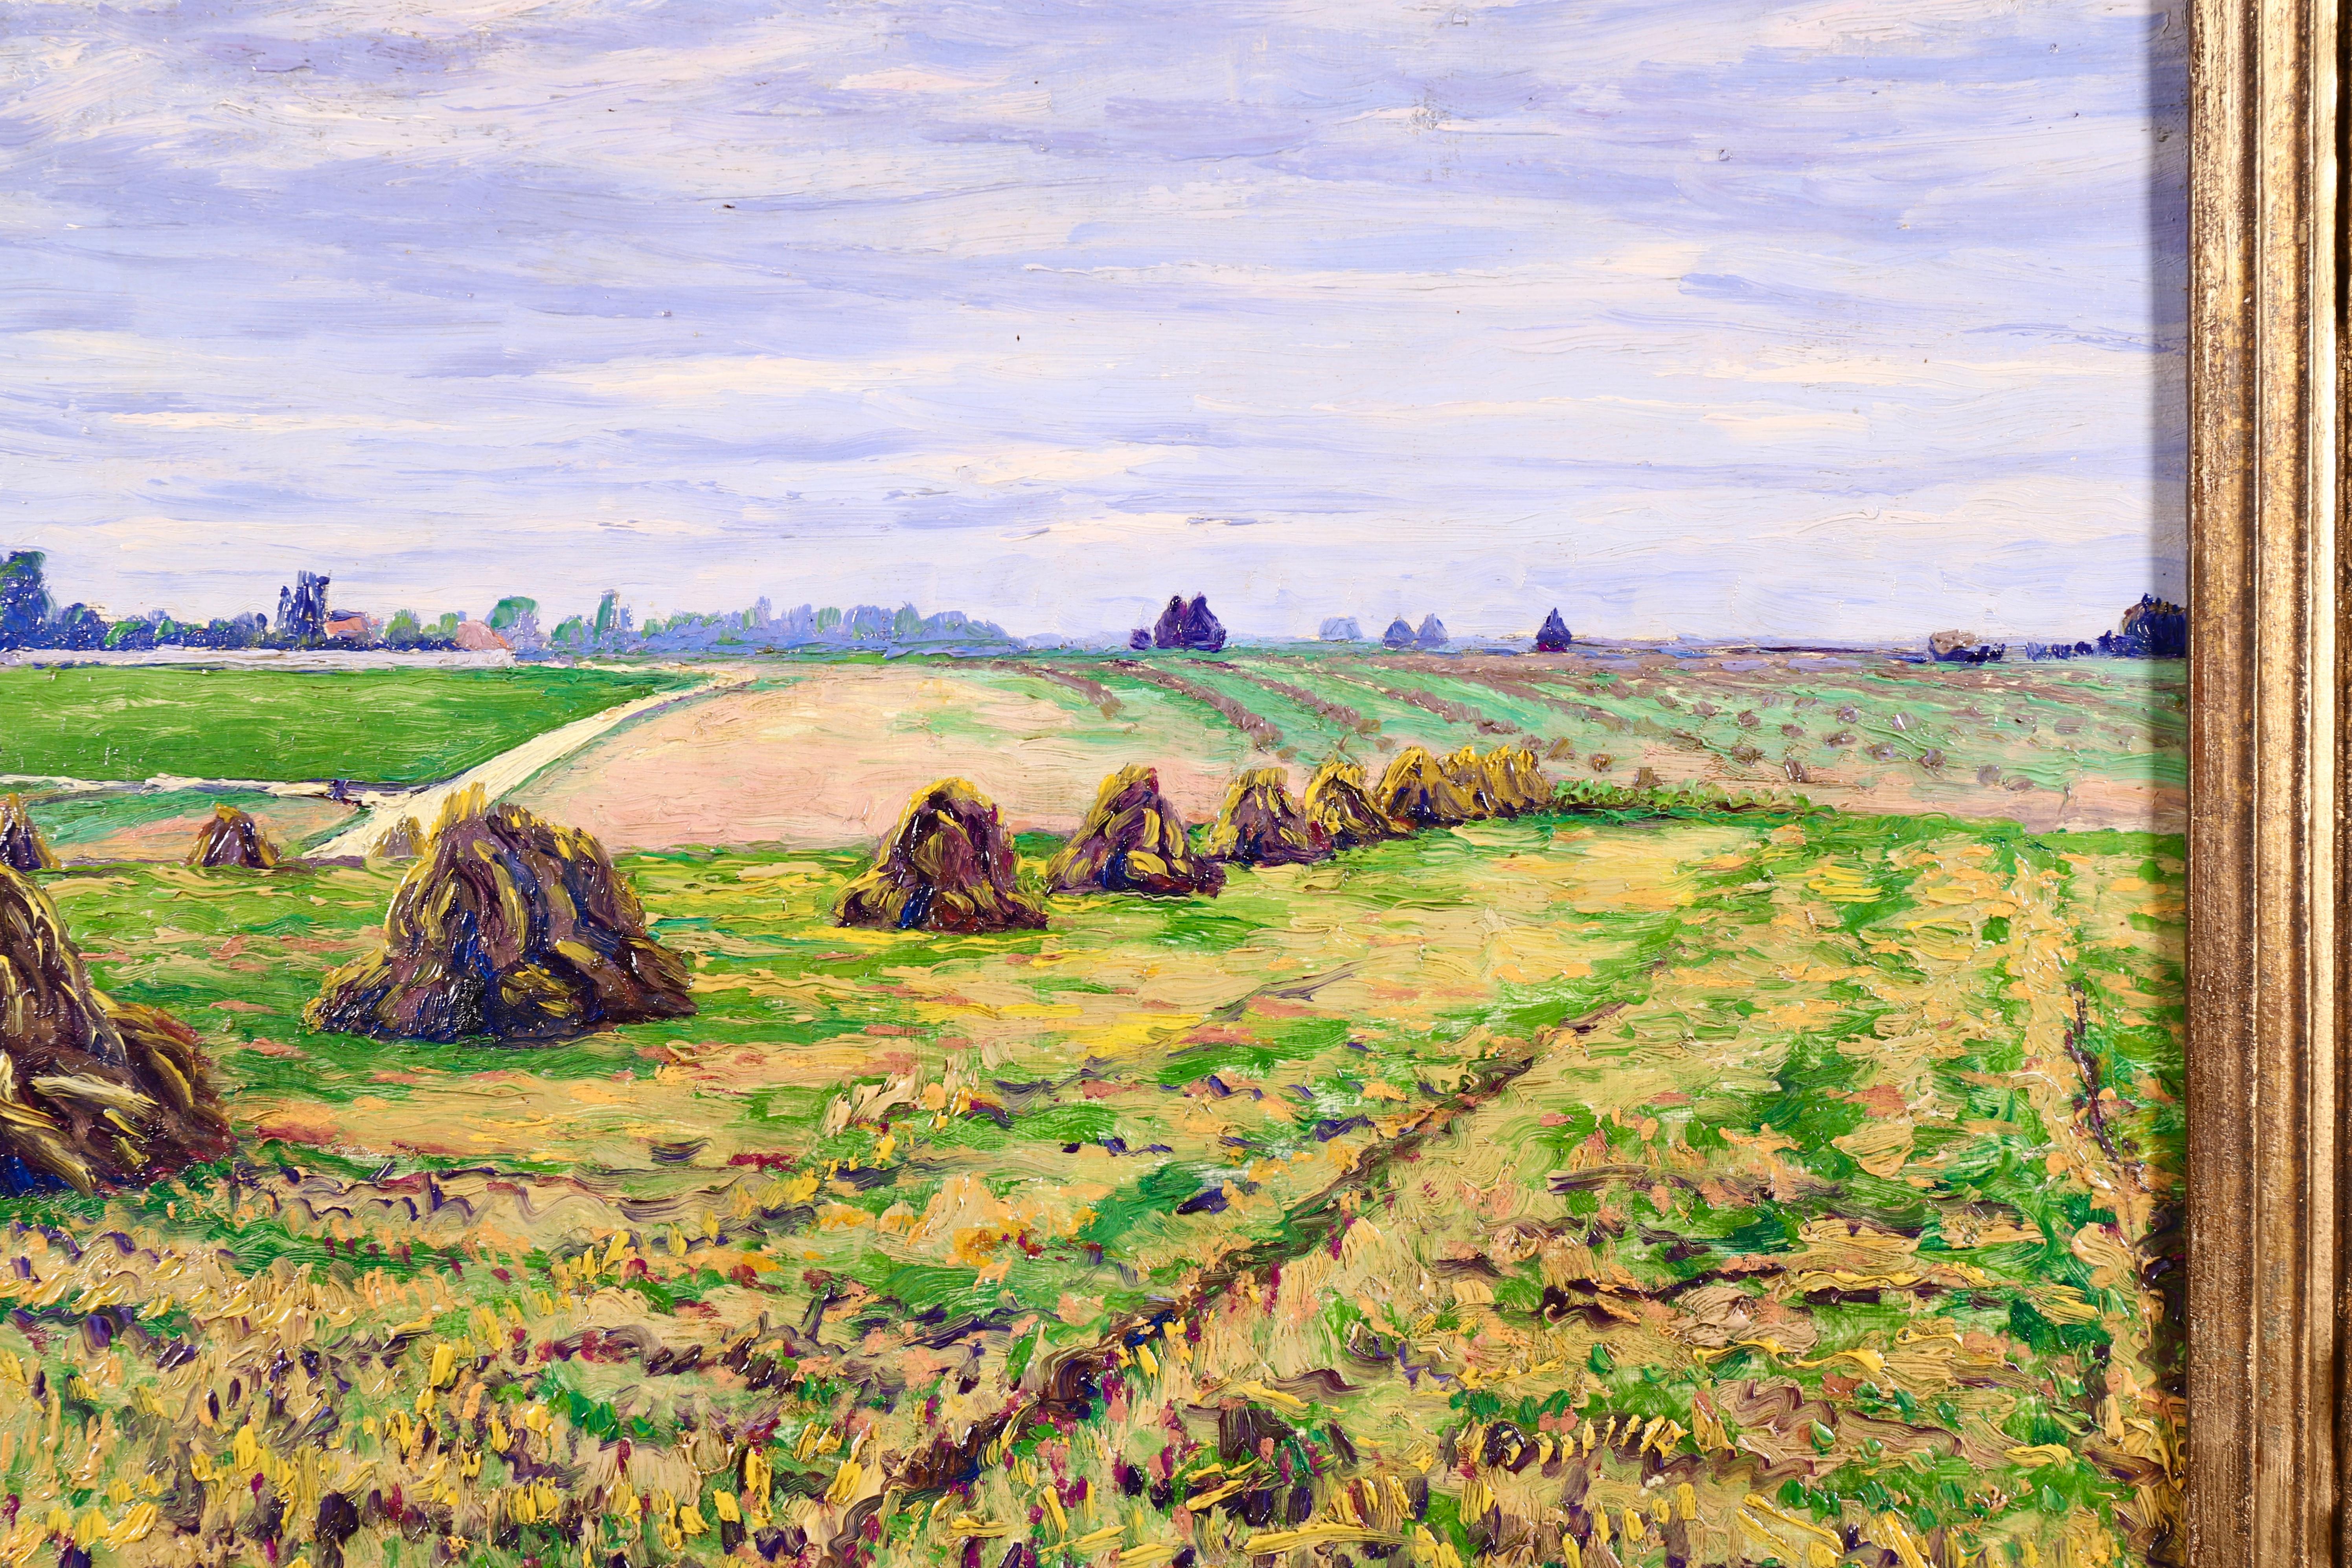 Haystacks - 20th Century Post Impressionist Oil, Landscape by Gustave Cariot - Post-Impressionist Painting by Gustave Camille Gaston Cariot